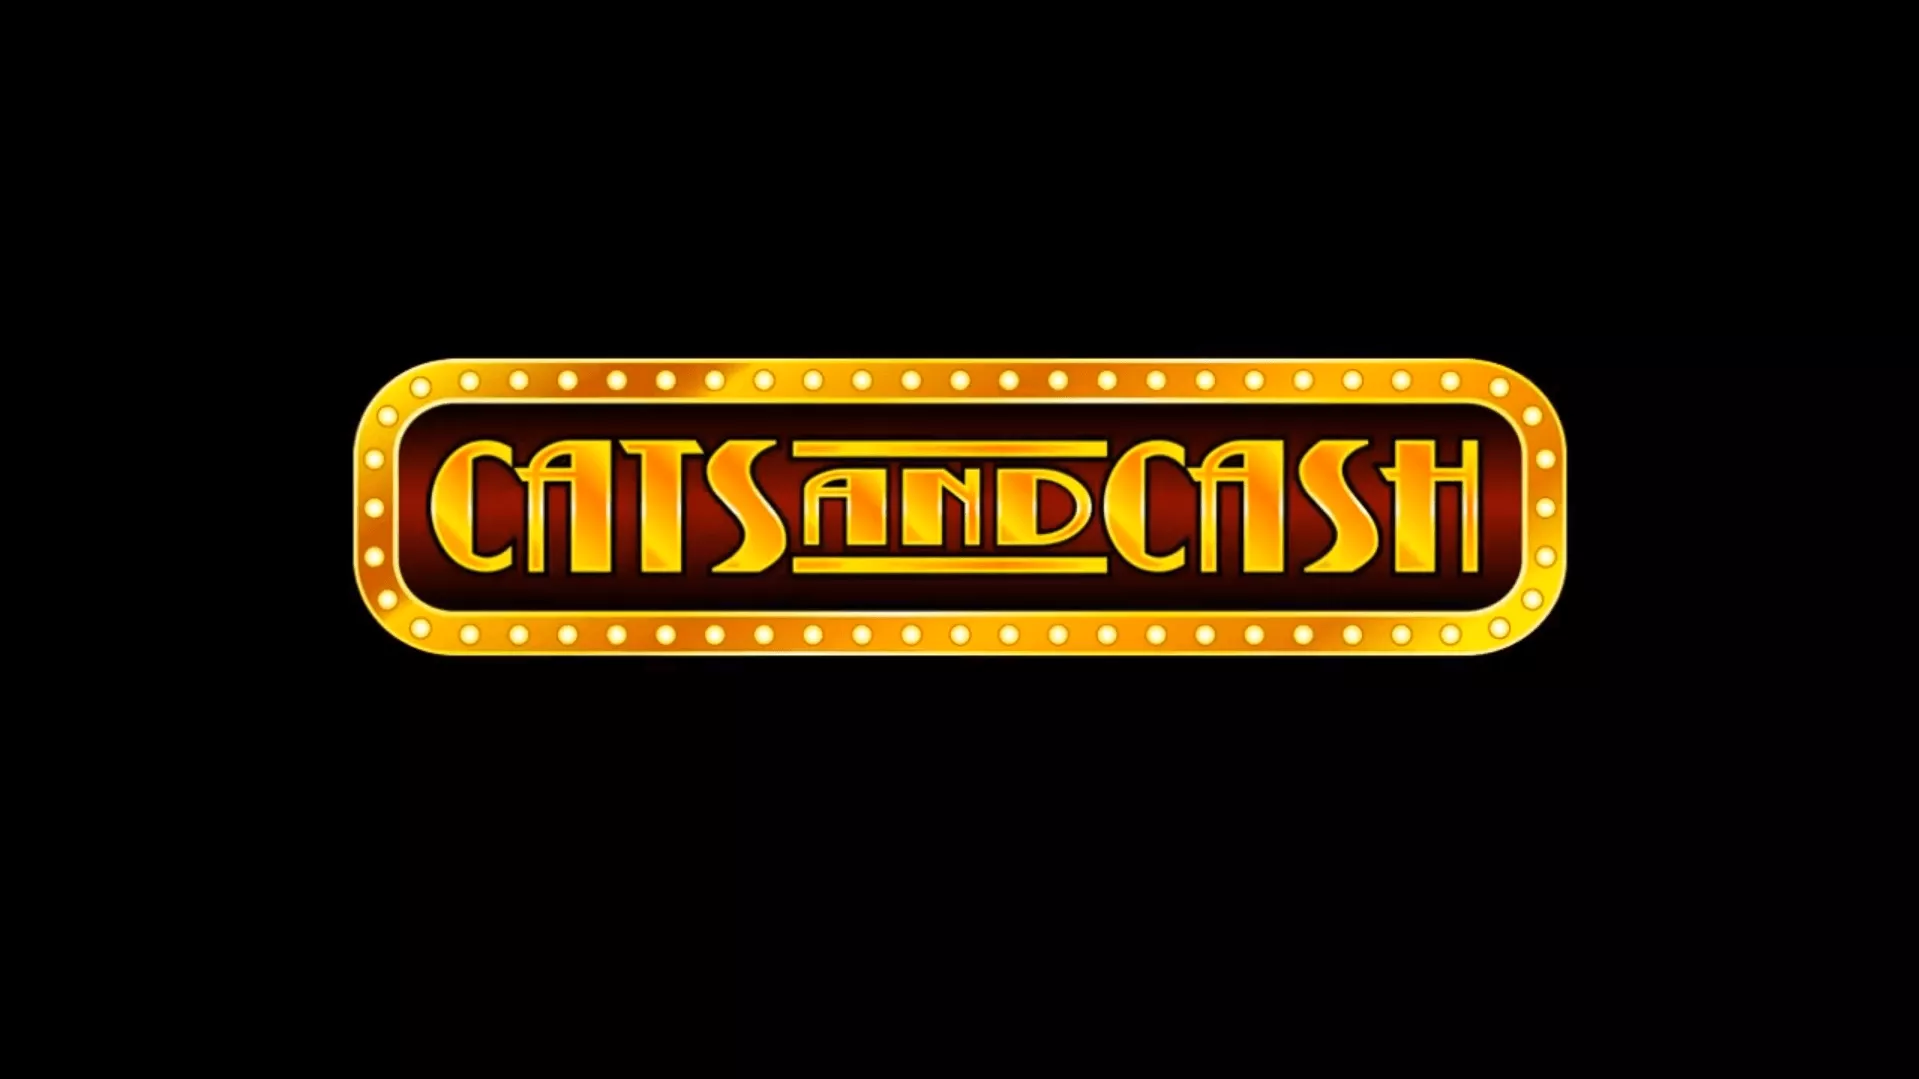 Cats and Cash slot